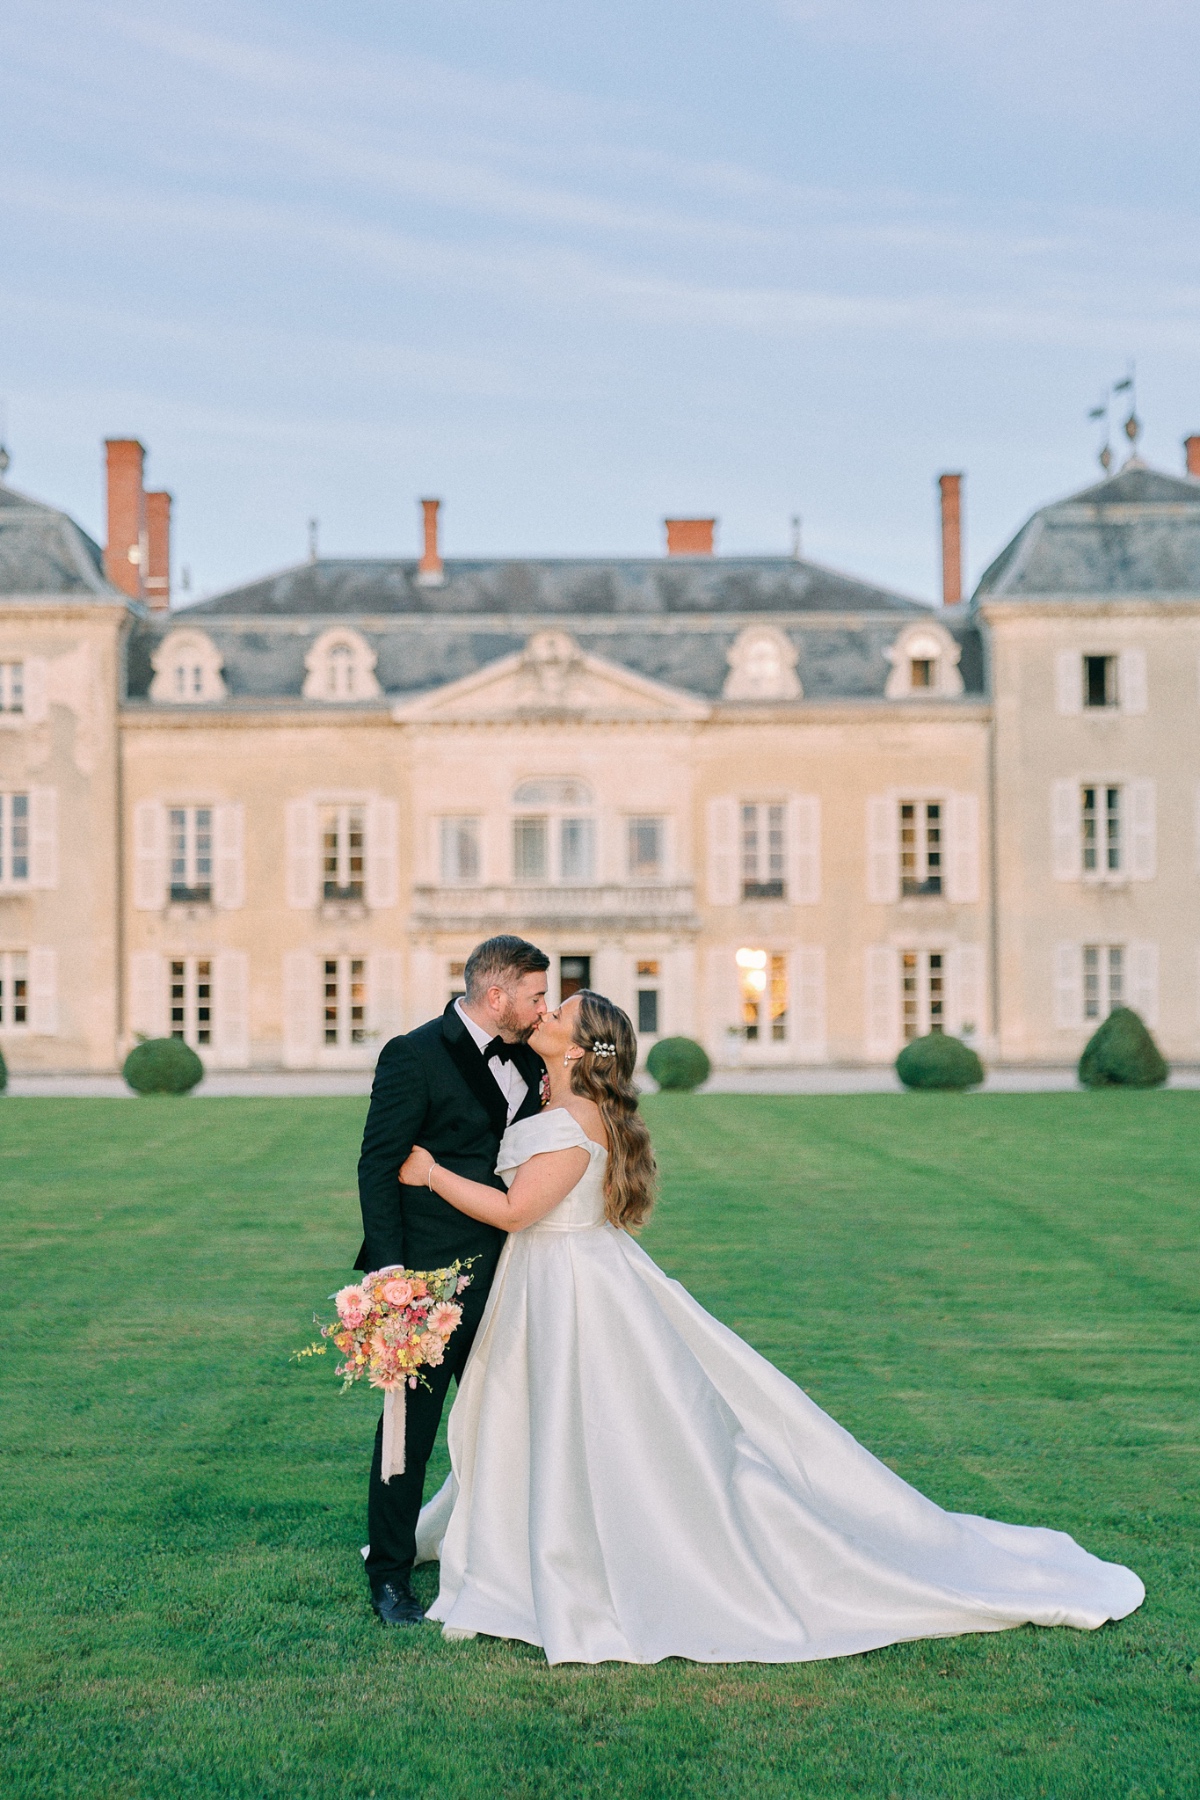 Sunset wedding portraits at French chateau 